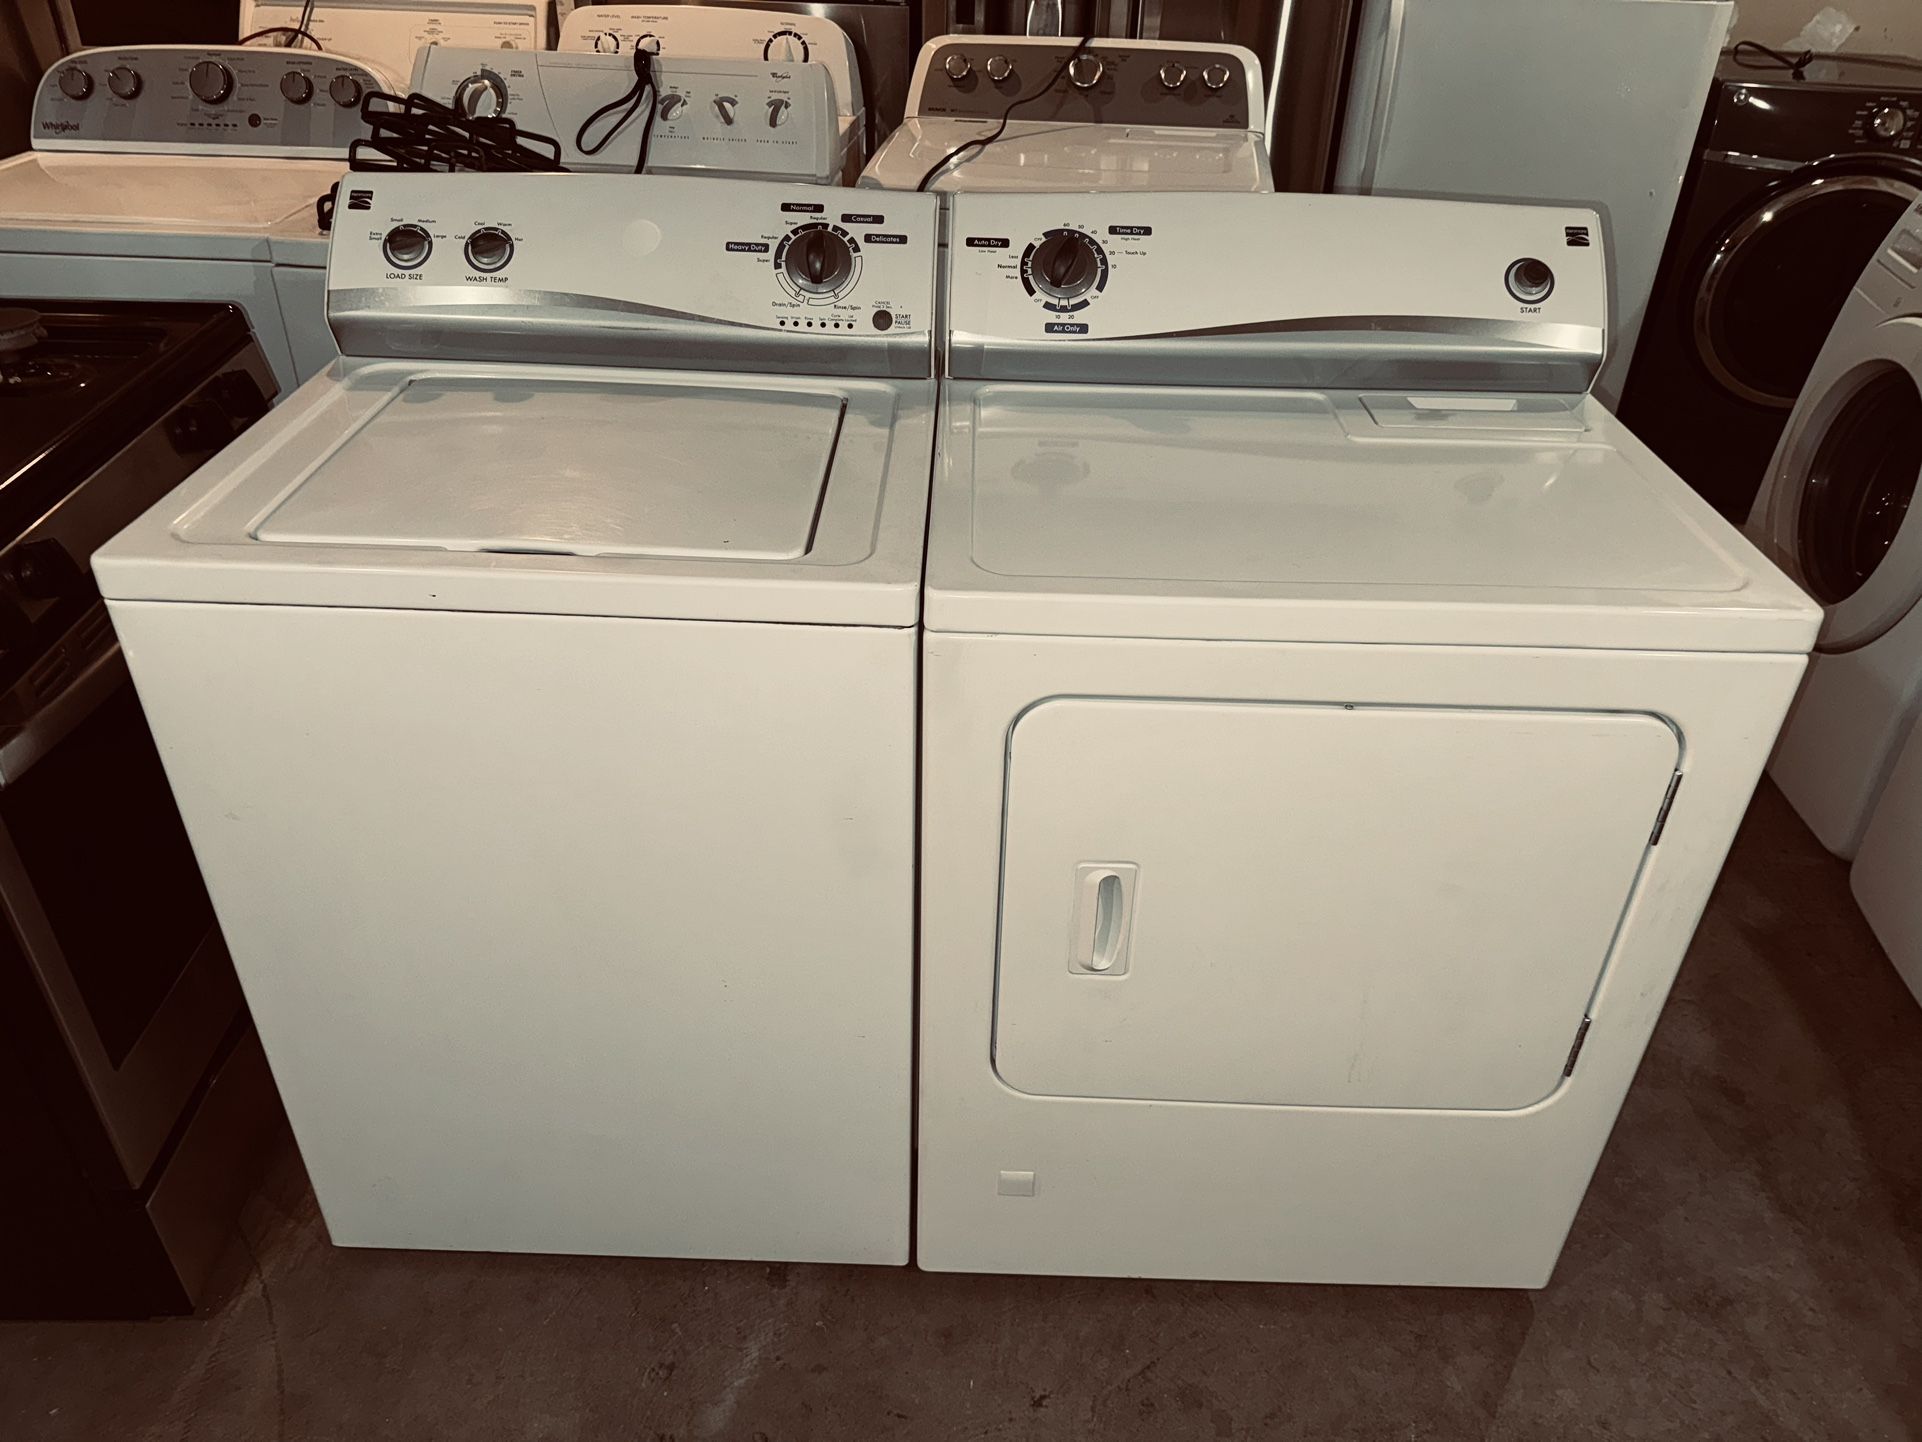 Kenmore Washer and Gas Dryer Works Perfec 3 Month Warranty We Deliver 